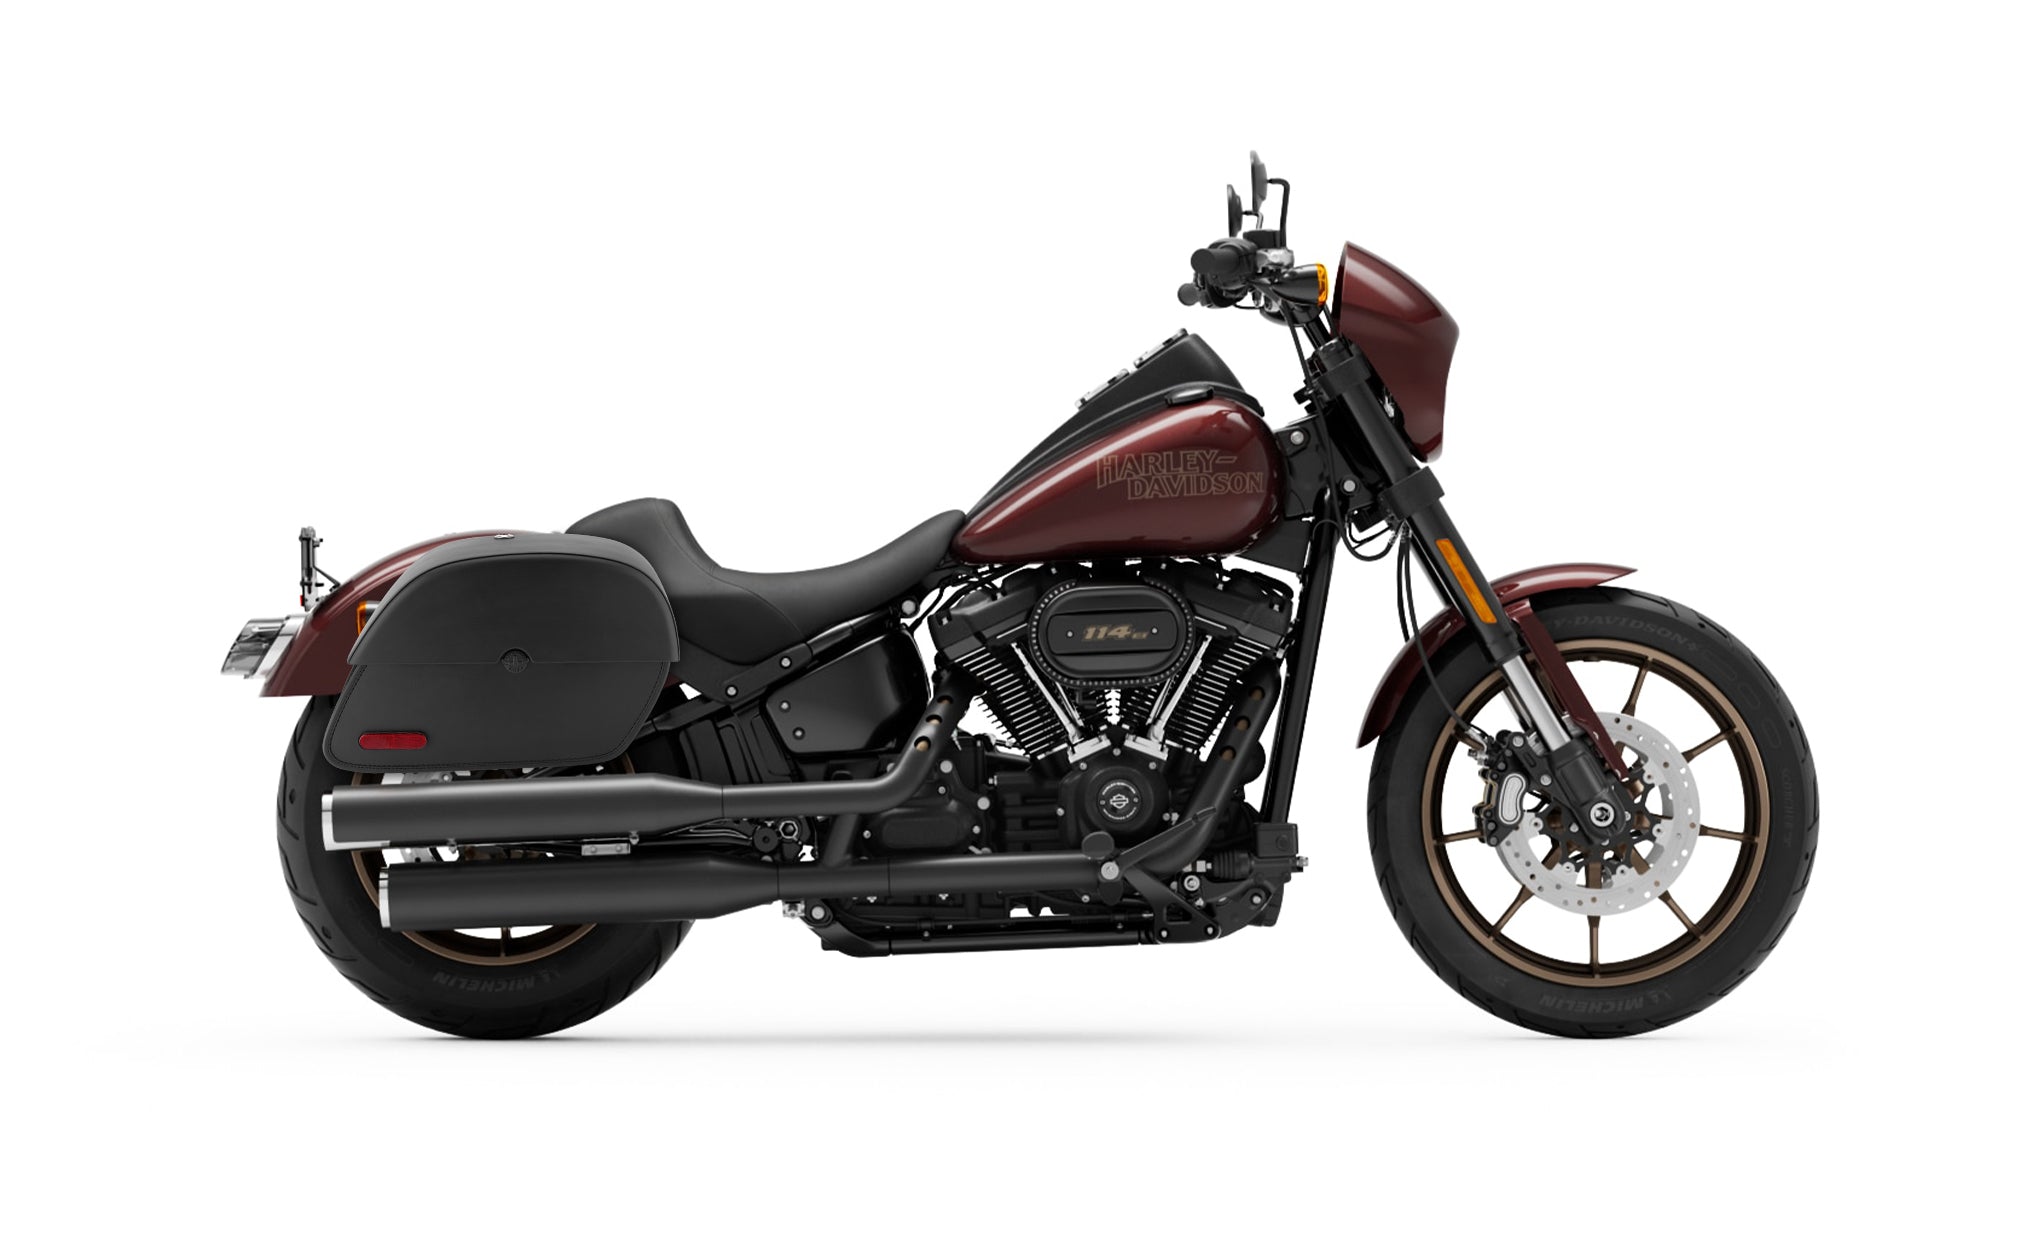 28L - Panzer Medium Quick Mount Leather Saddlebags For Harley Softail Low Rider S FXLRS @expand